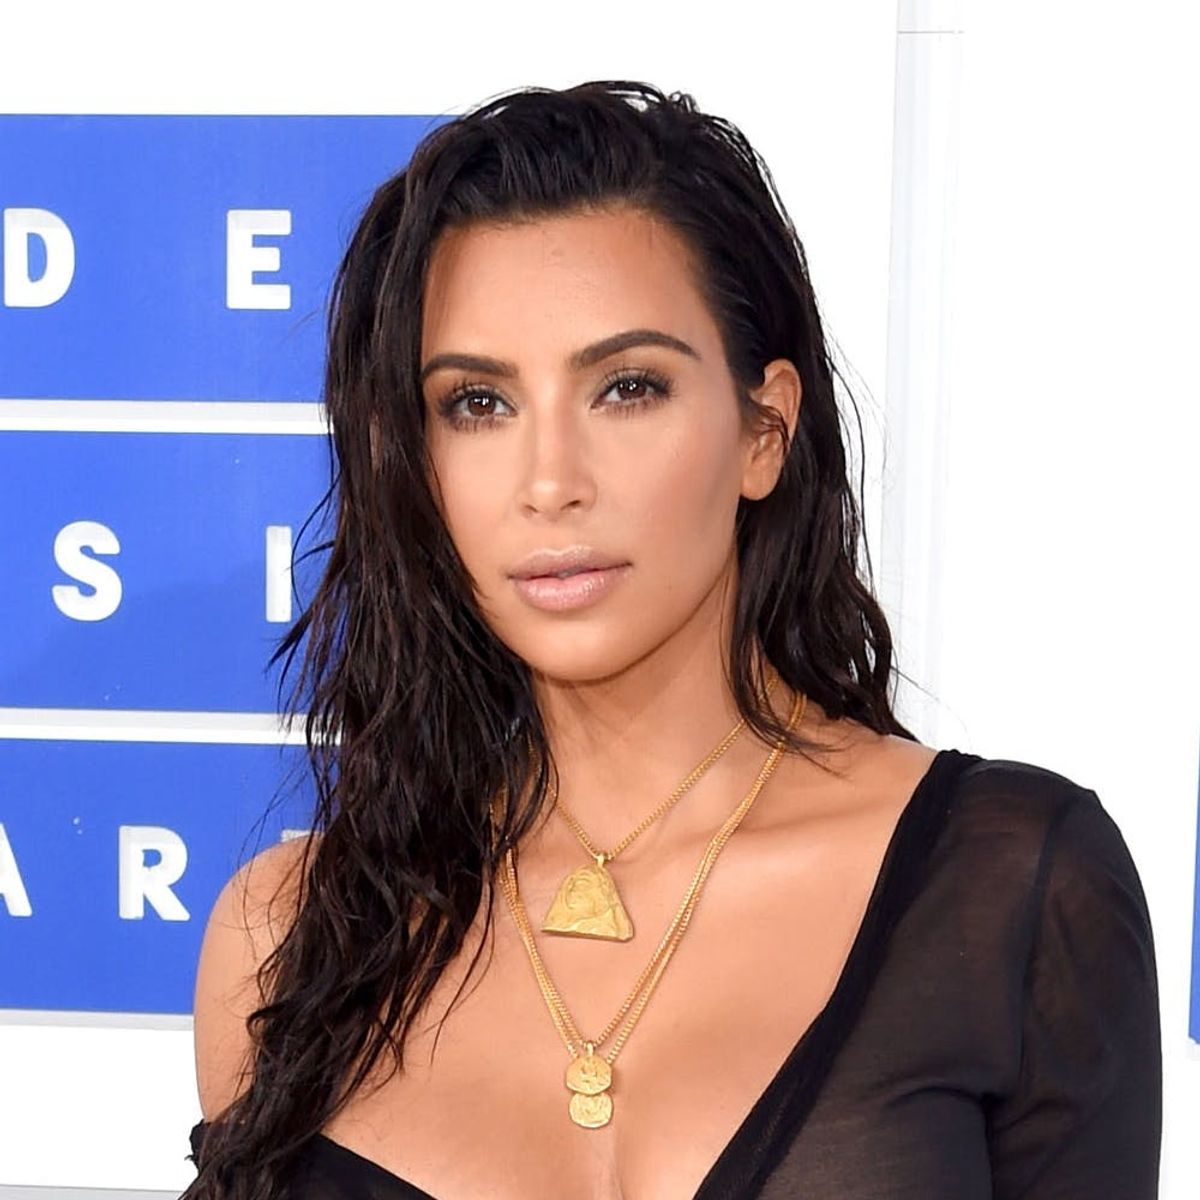 There’s Now a SUPER Controversial Halloween Costume of Kim Kardashian’s Robbery